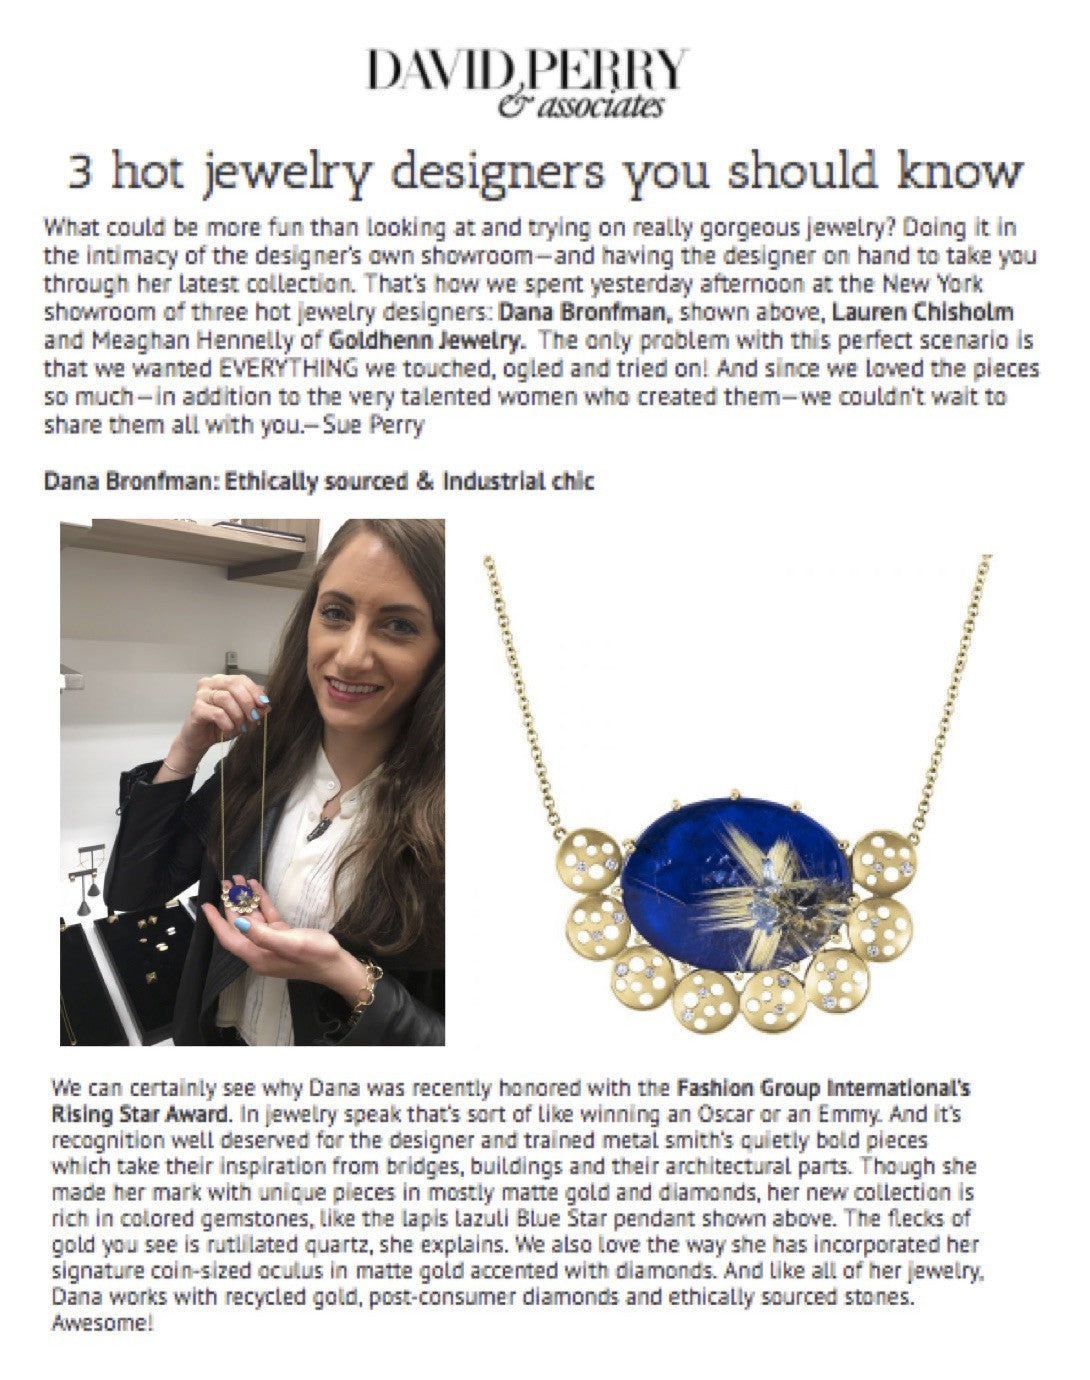 Blue Star Necklace featured on David Perry & Assoc.